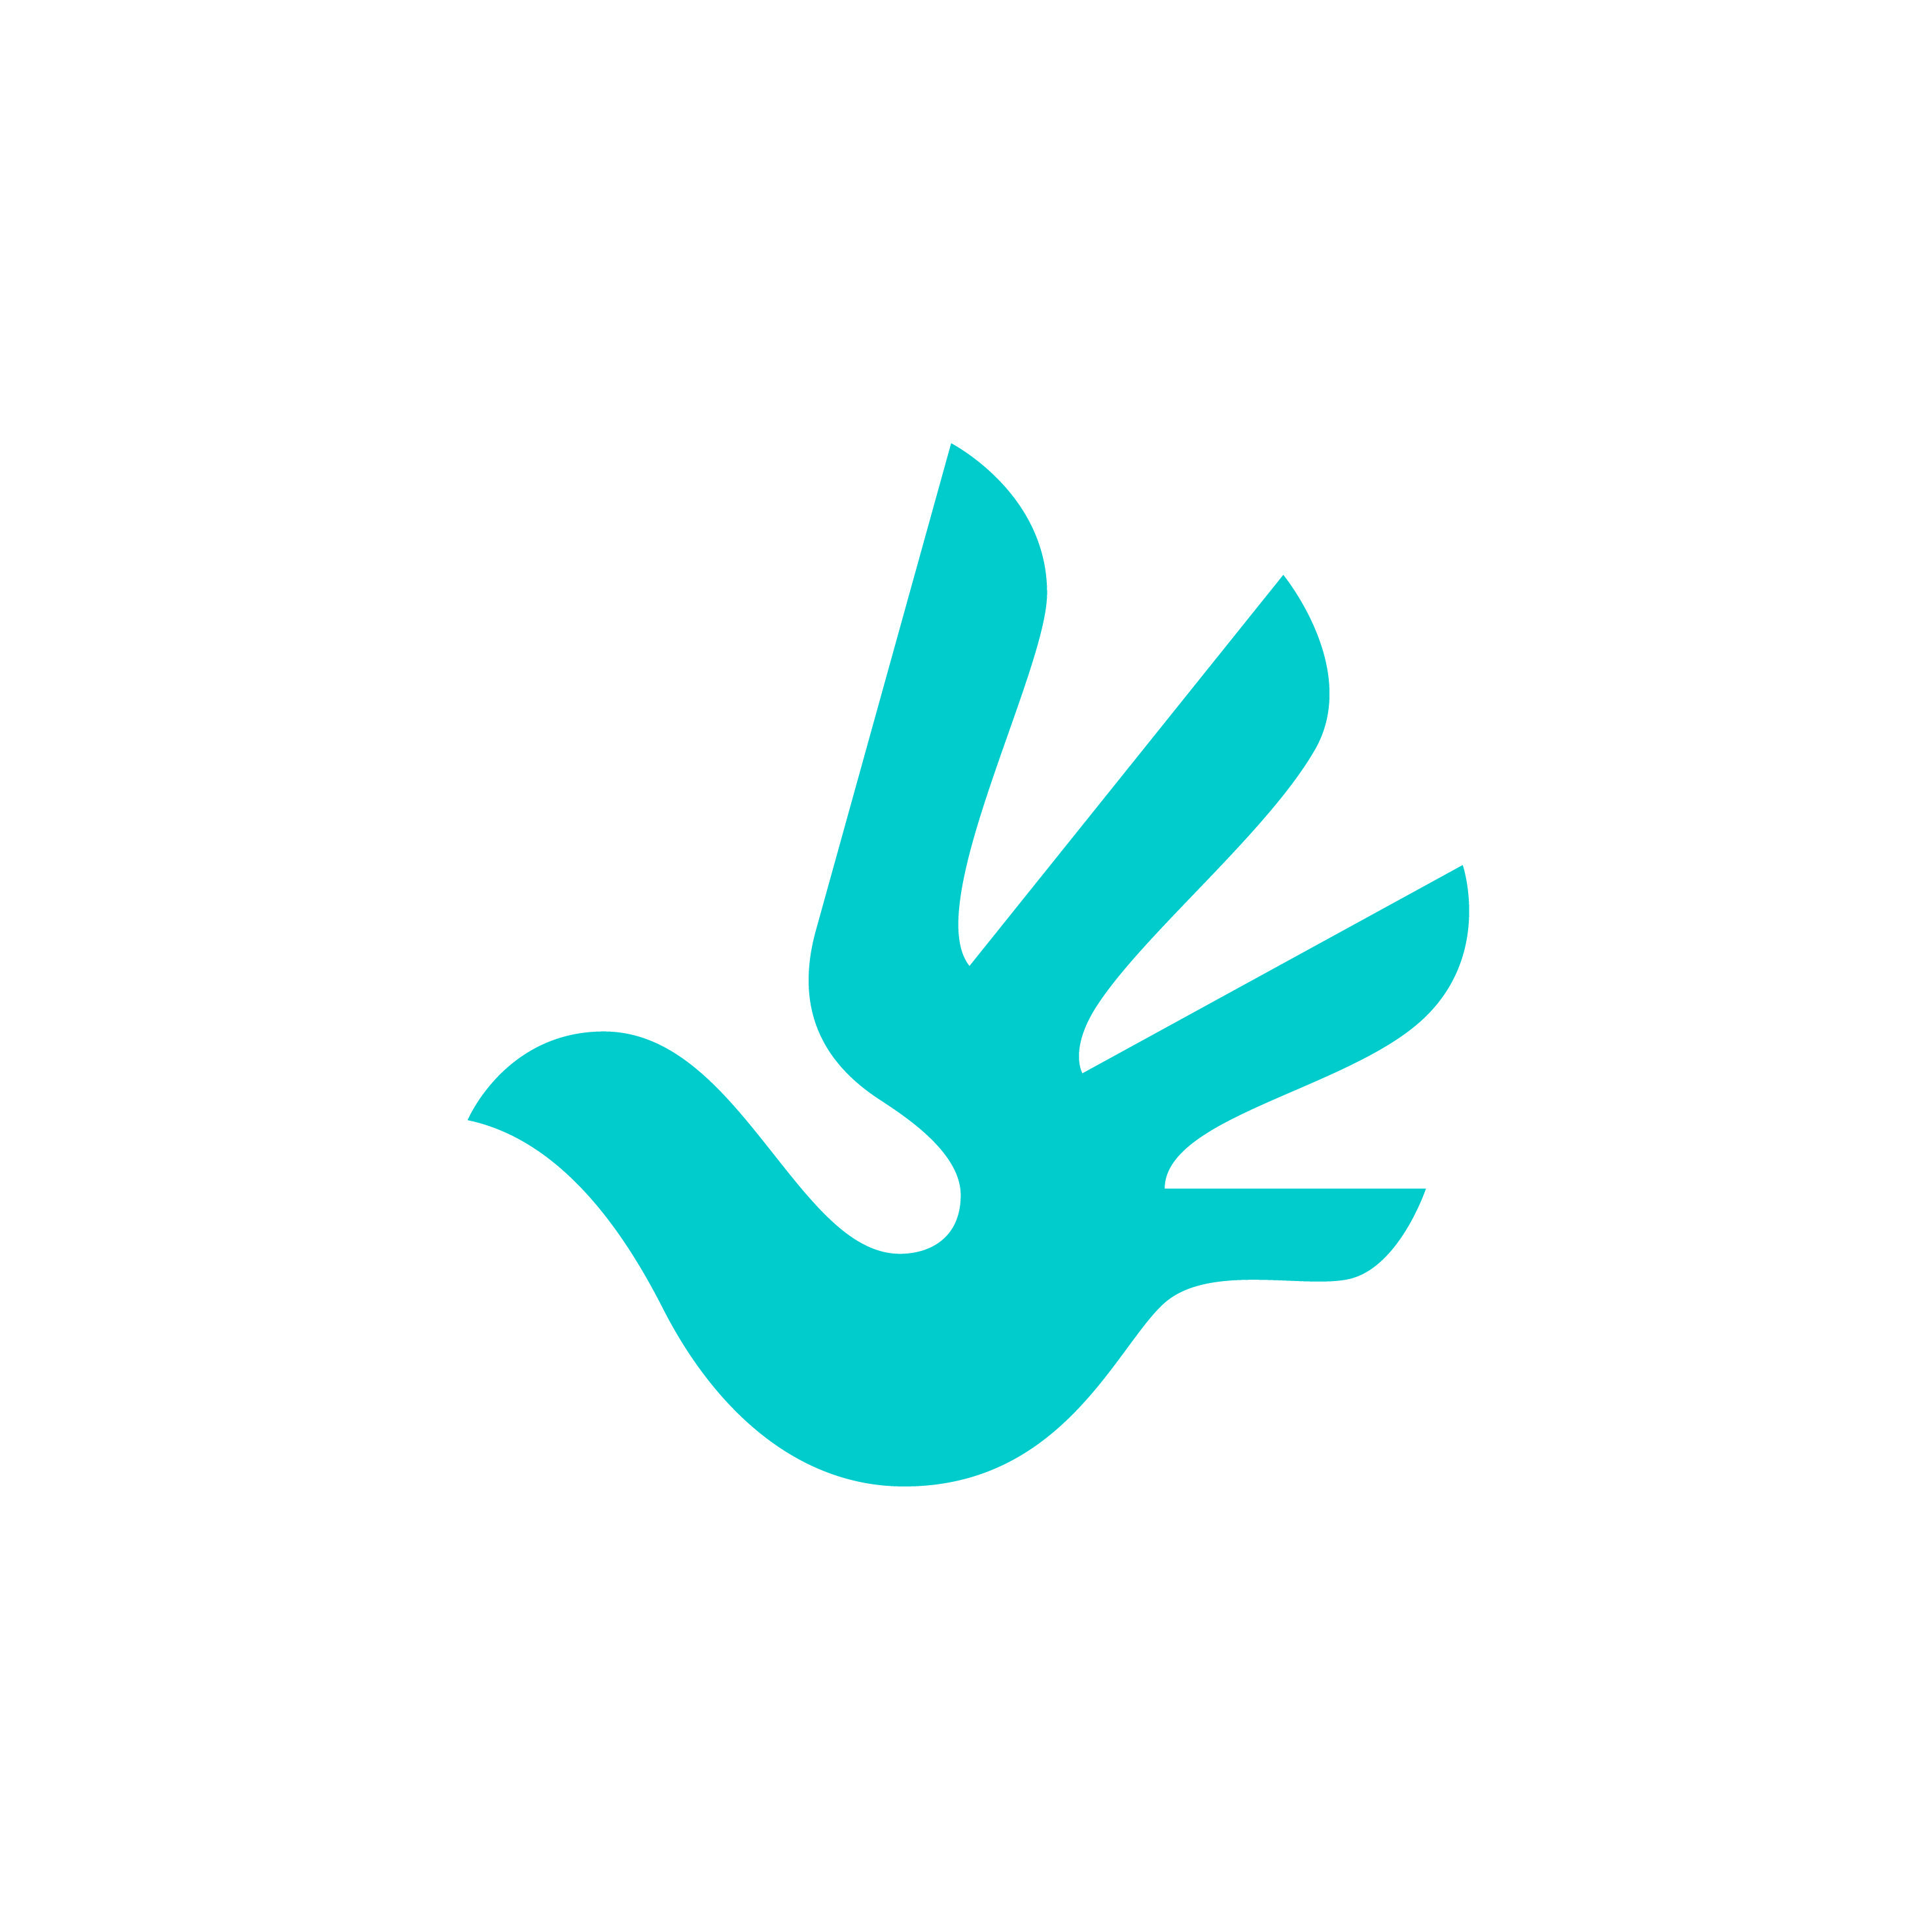 Teal and Blue Logo - Downloads. The Universal Logo For Human Rights